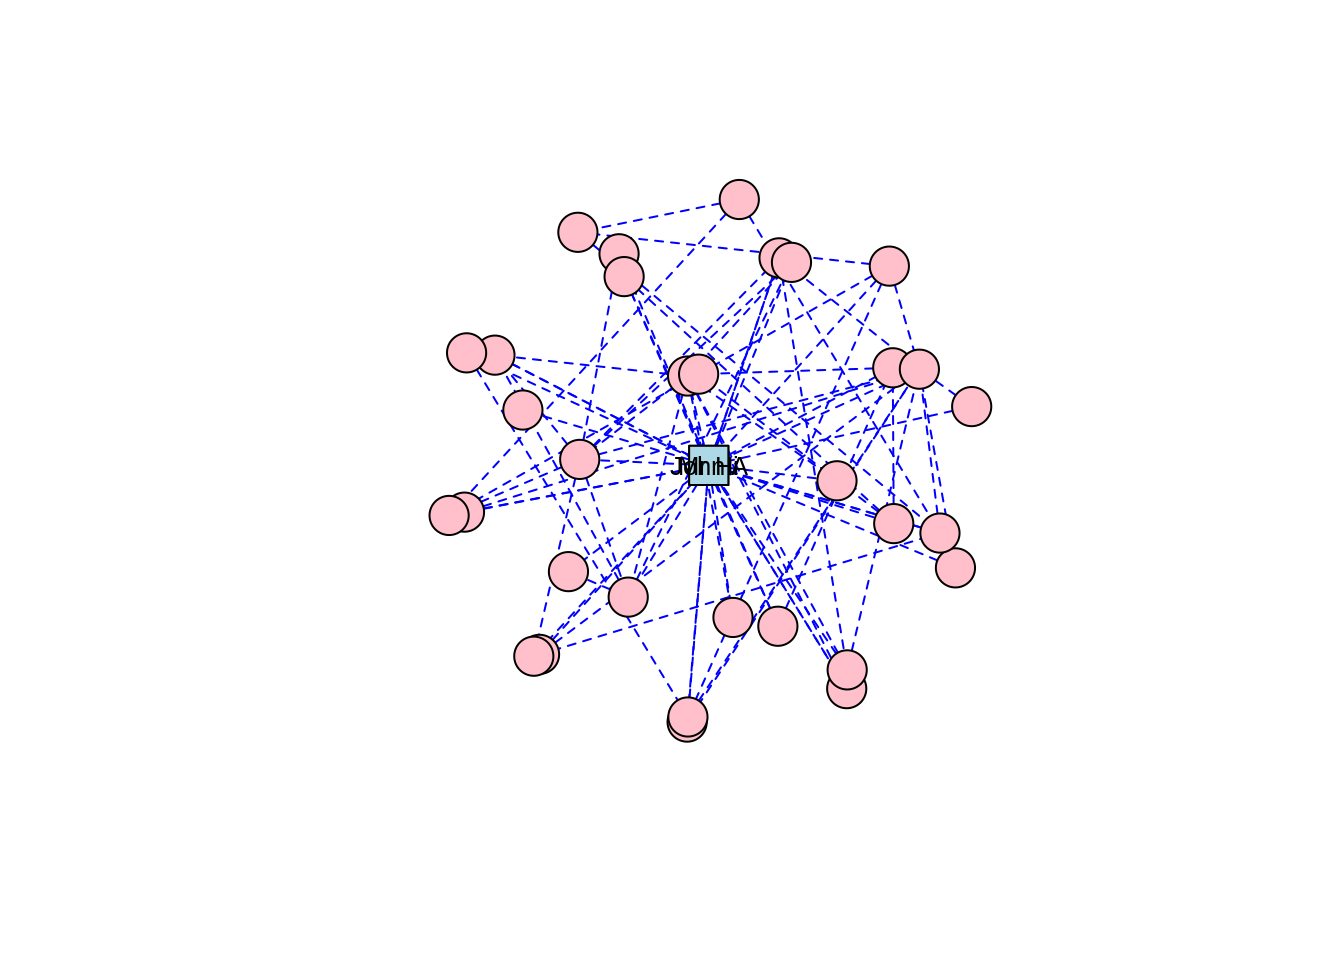 Sphere layout of the `karate` graph